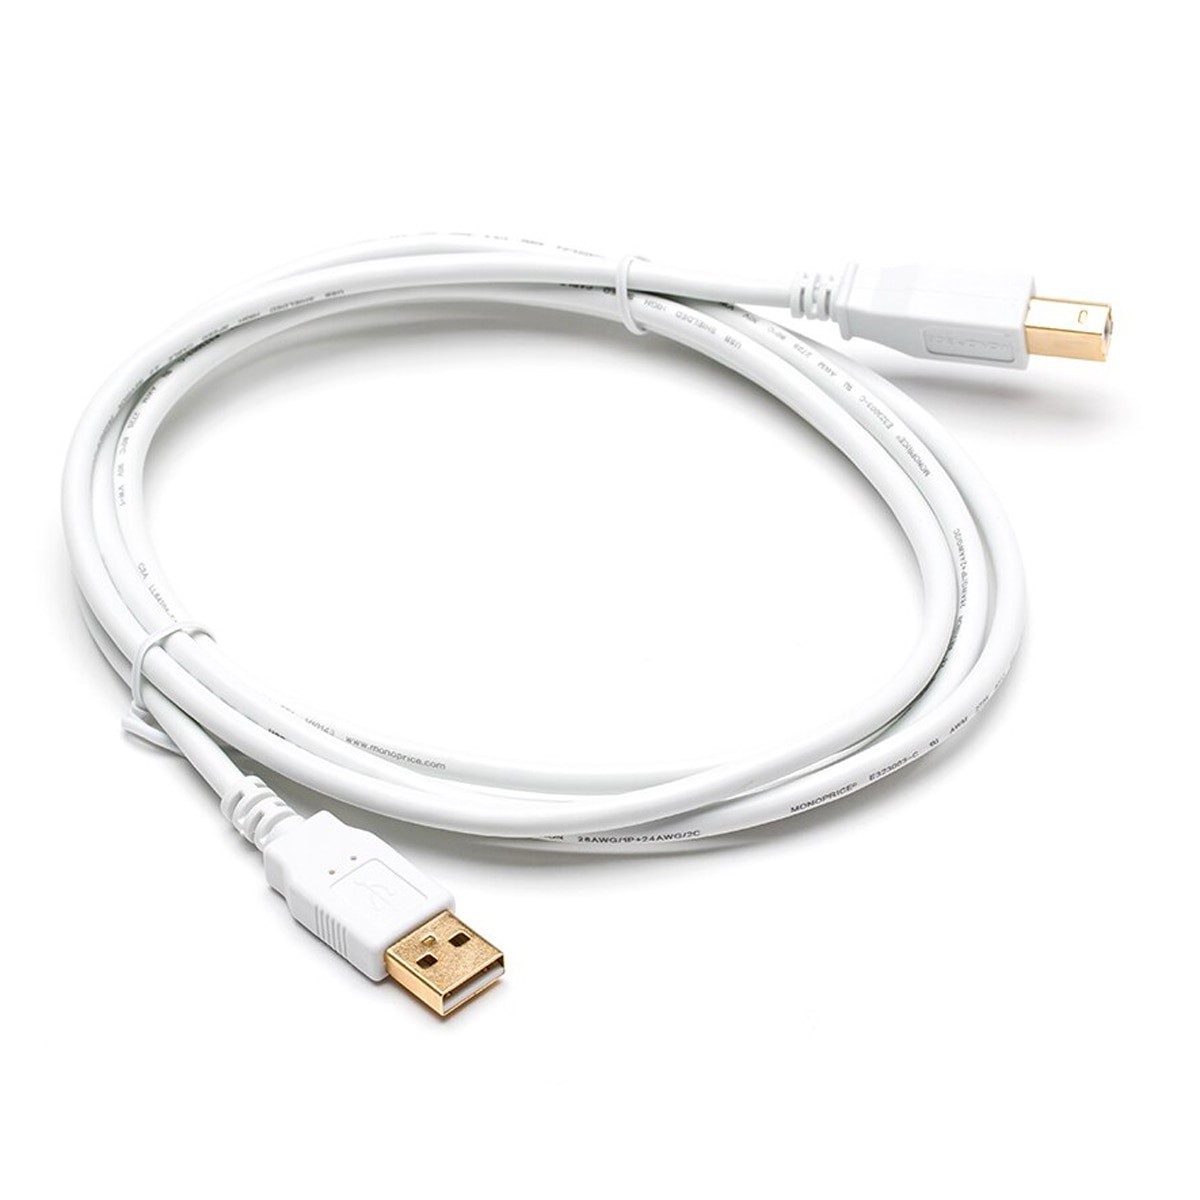 USB Cable for PC Connection - HI920013 